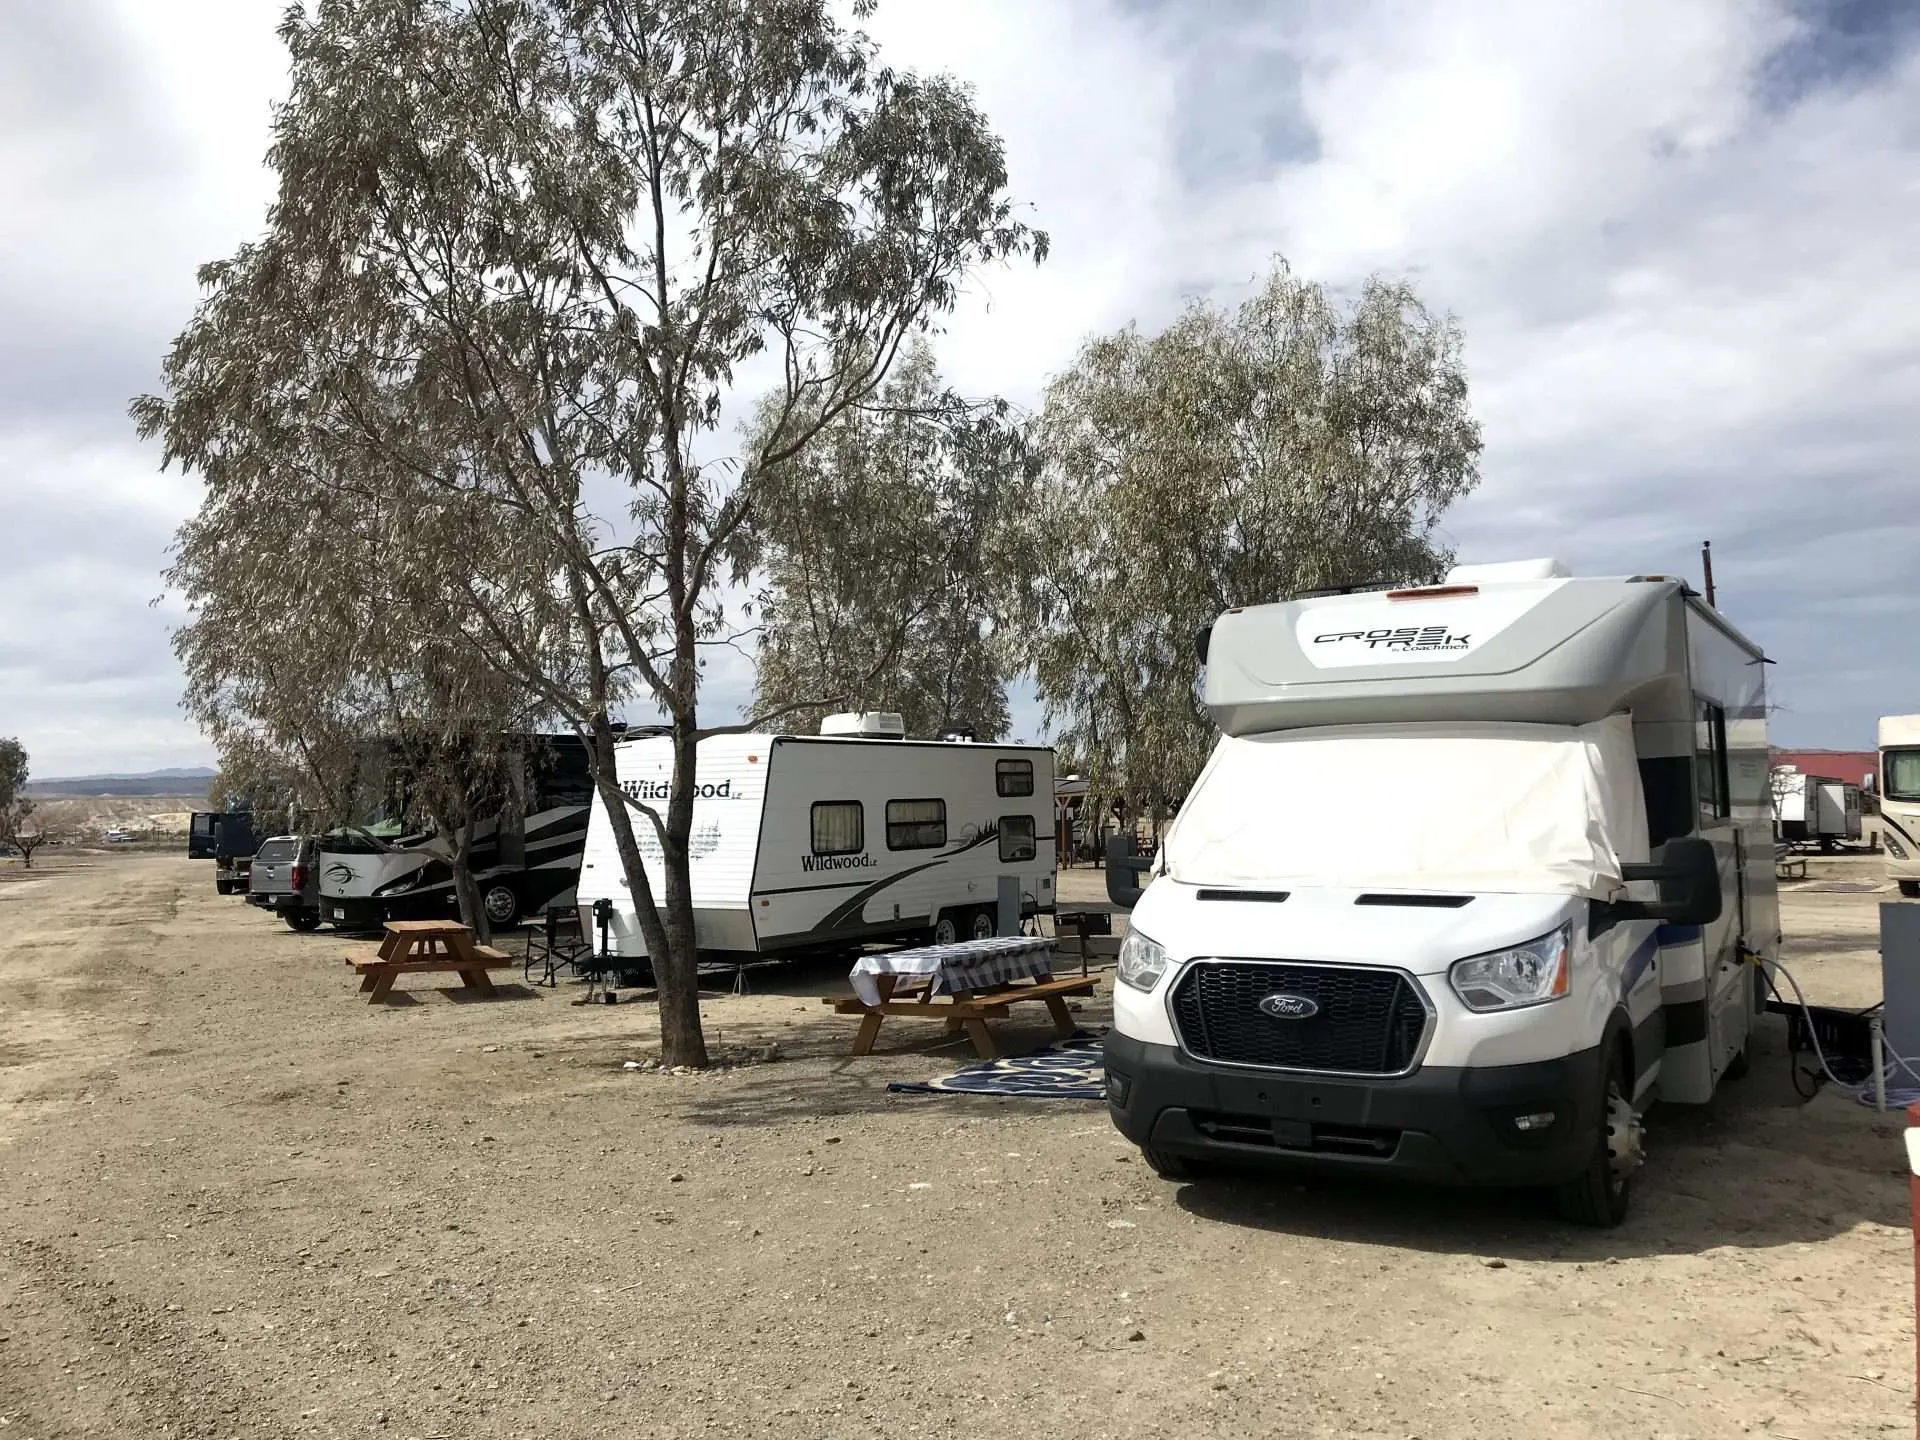 RVs parked in spots at campsite.